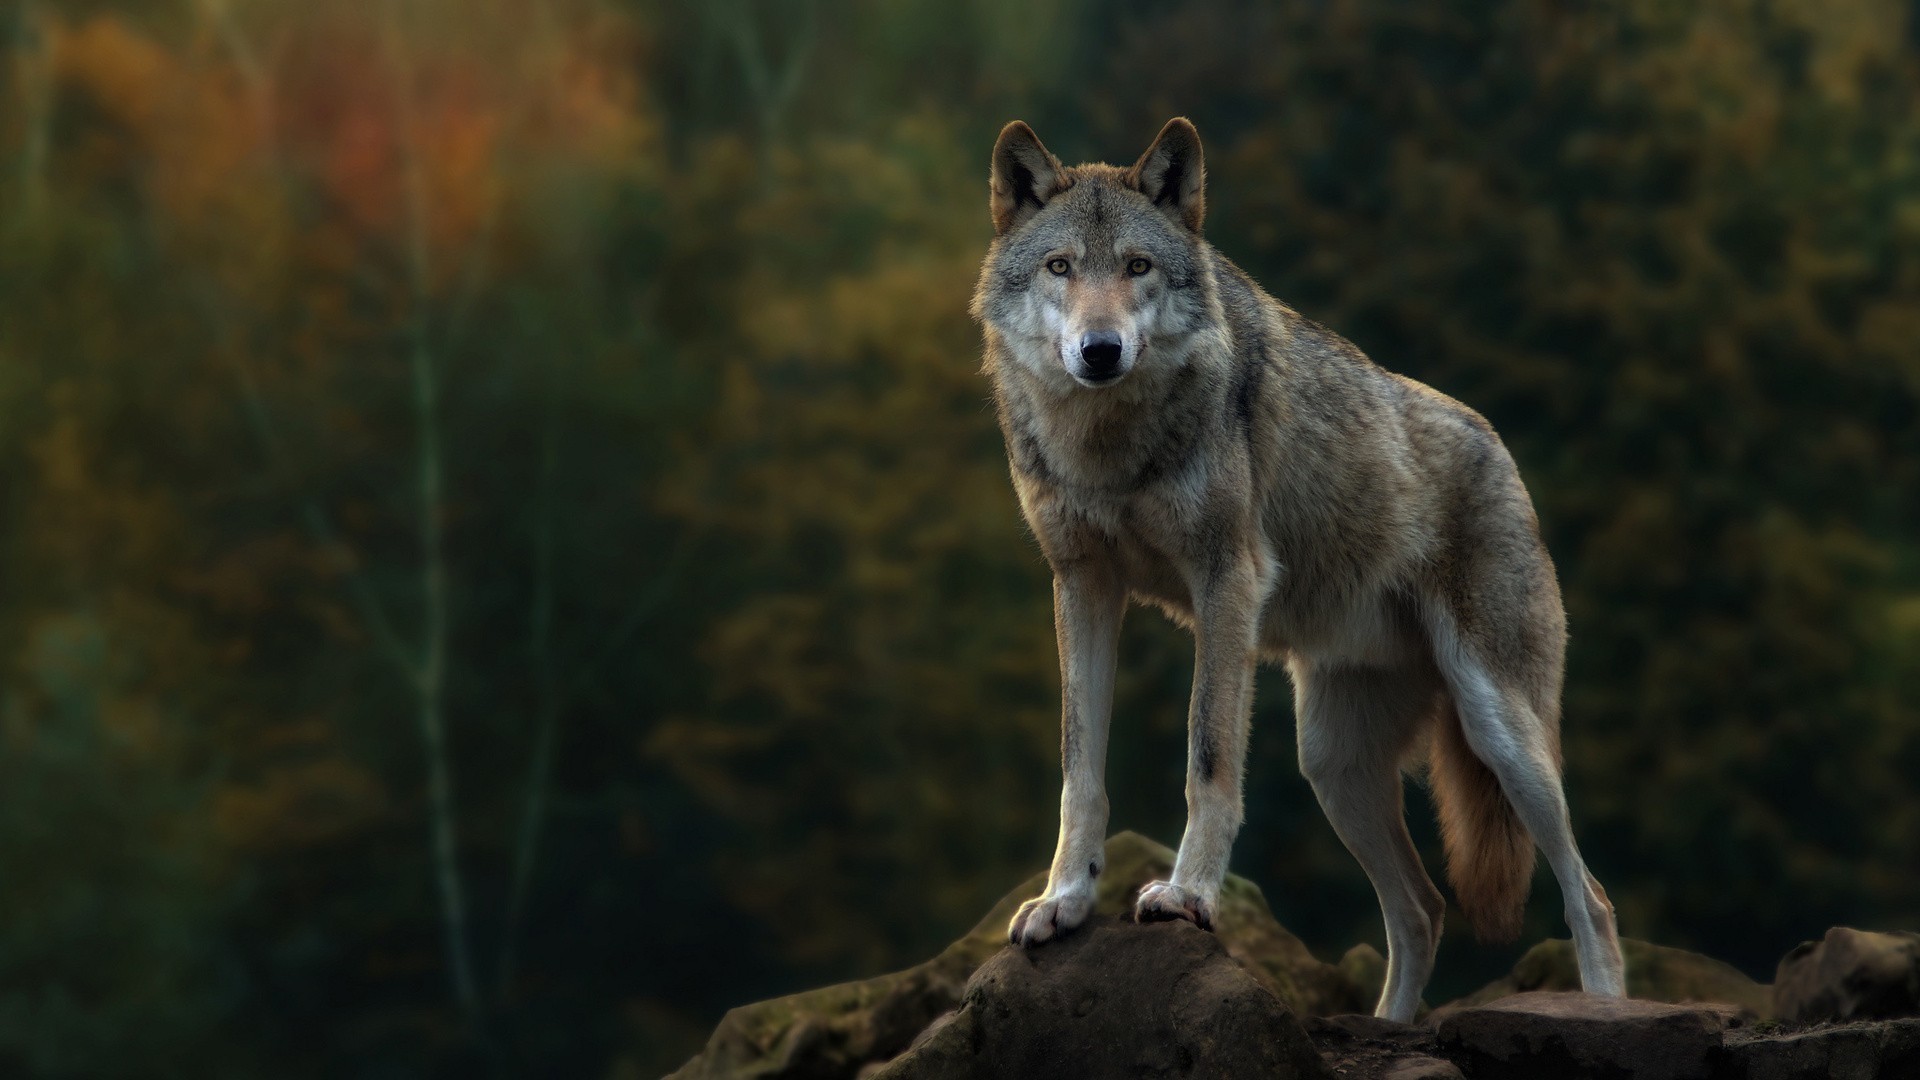 1920x1080 Wolf wallpaper hd Gallery| Beautiful and Interesting  Images,Vectors,Coloring,Cliparts |Free Hd wallpapers